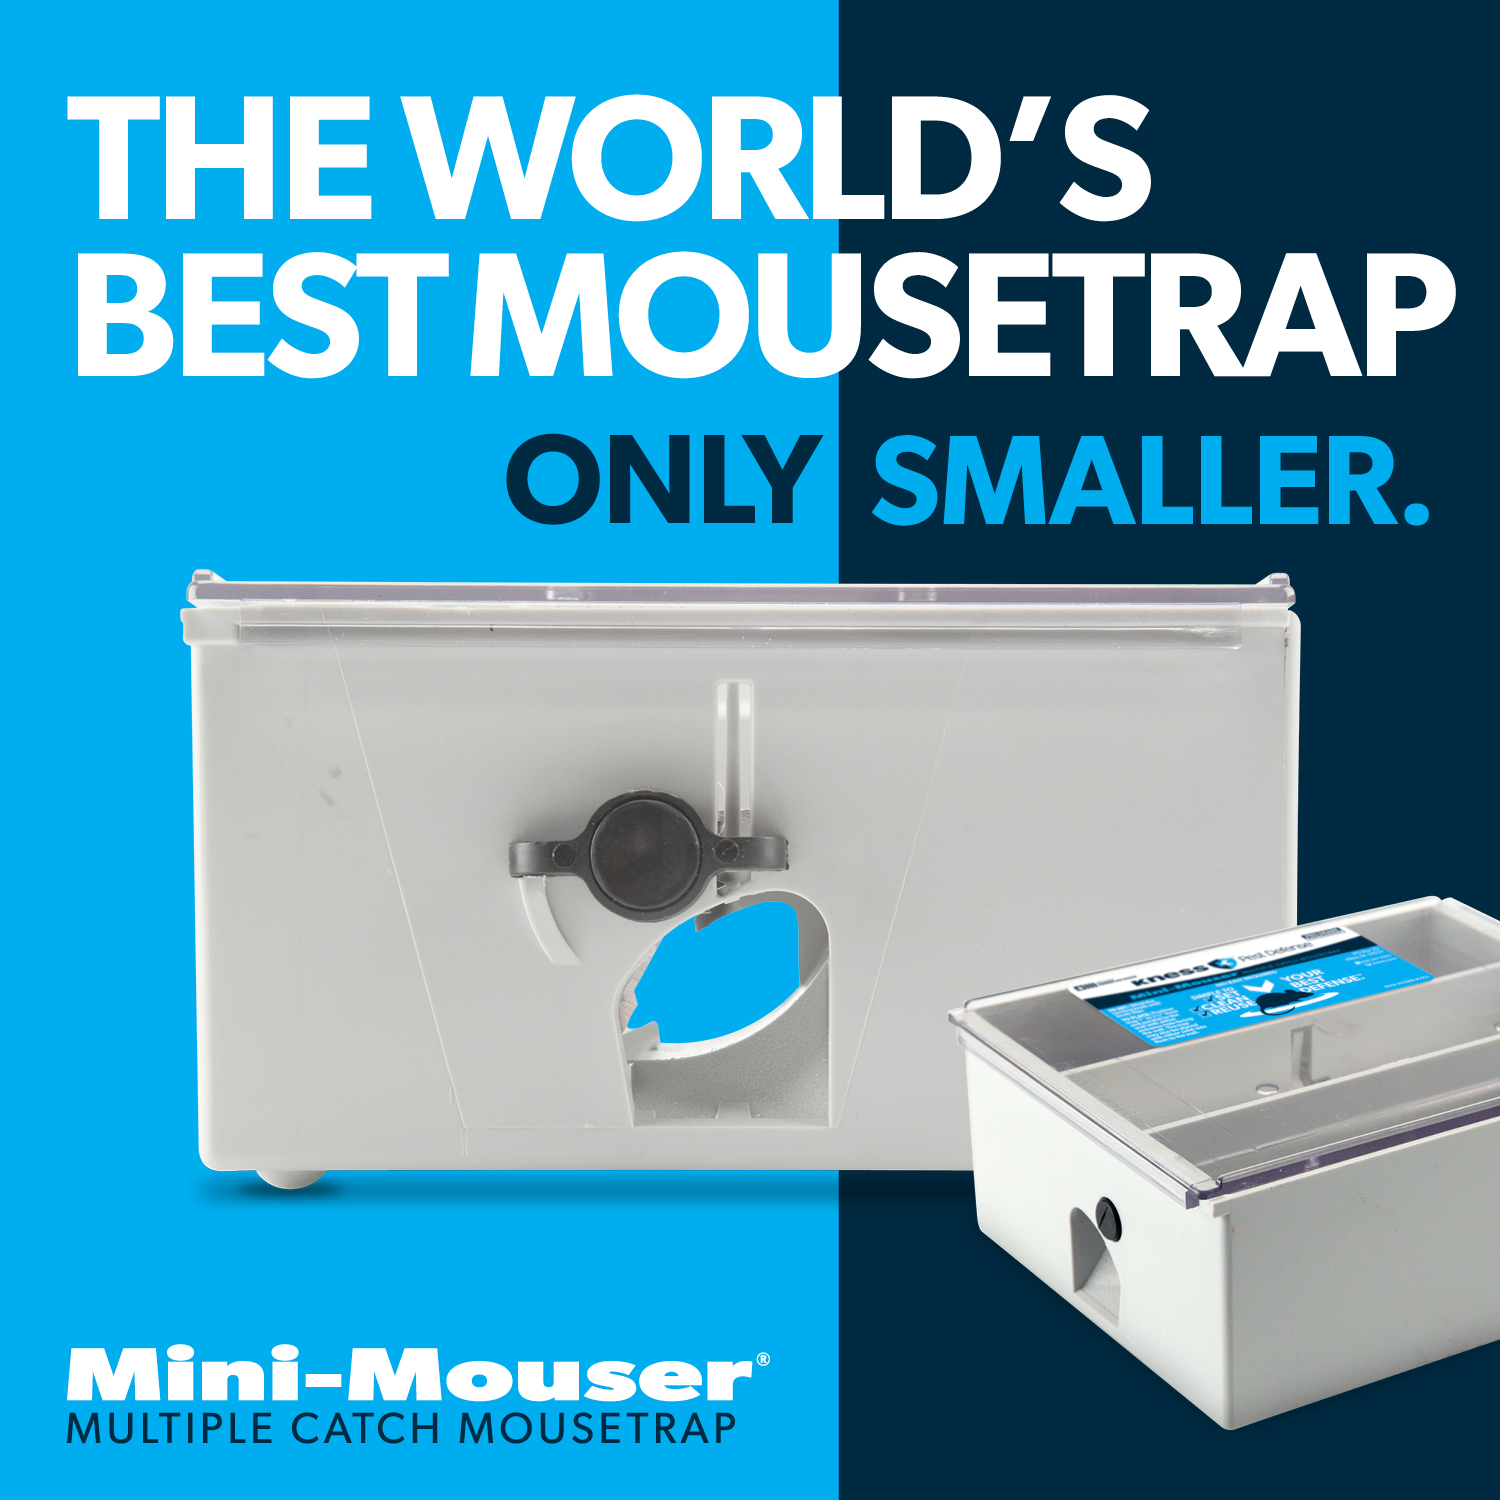 Kness' Ketch-All Mousetrap Captures Retailers' Choice Award